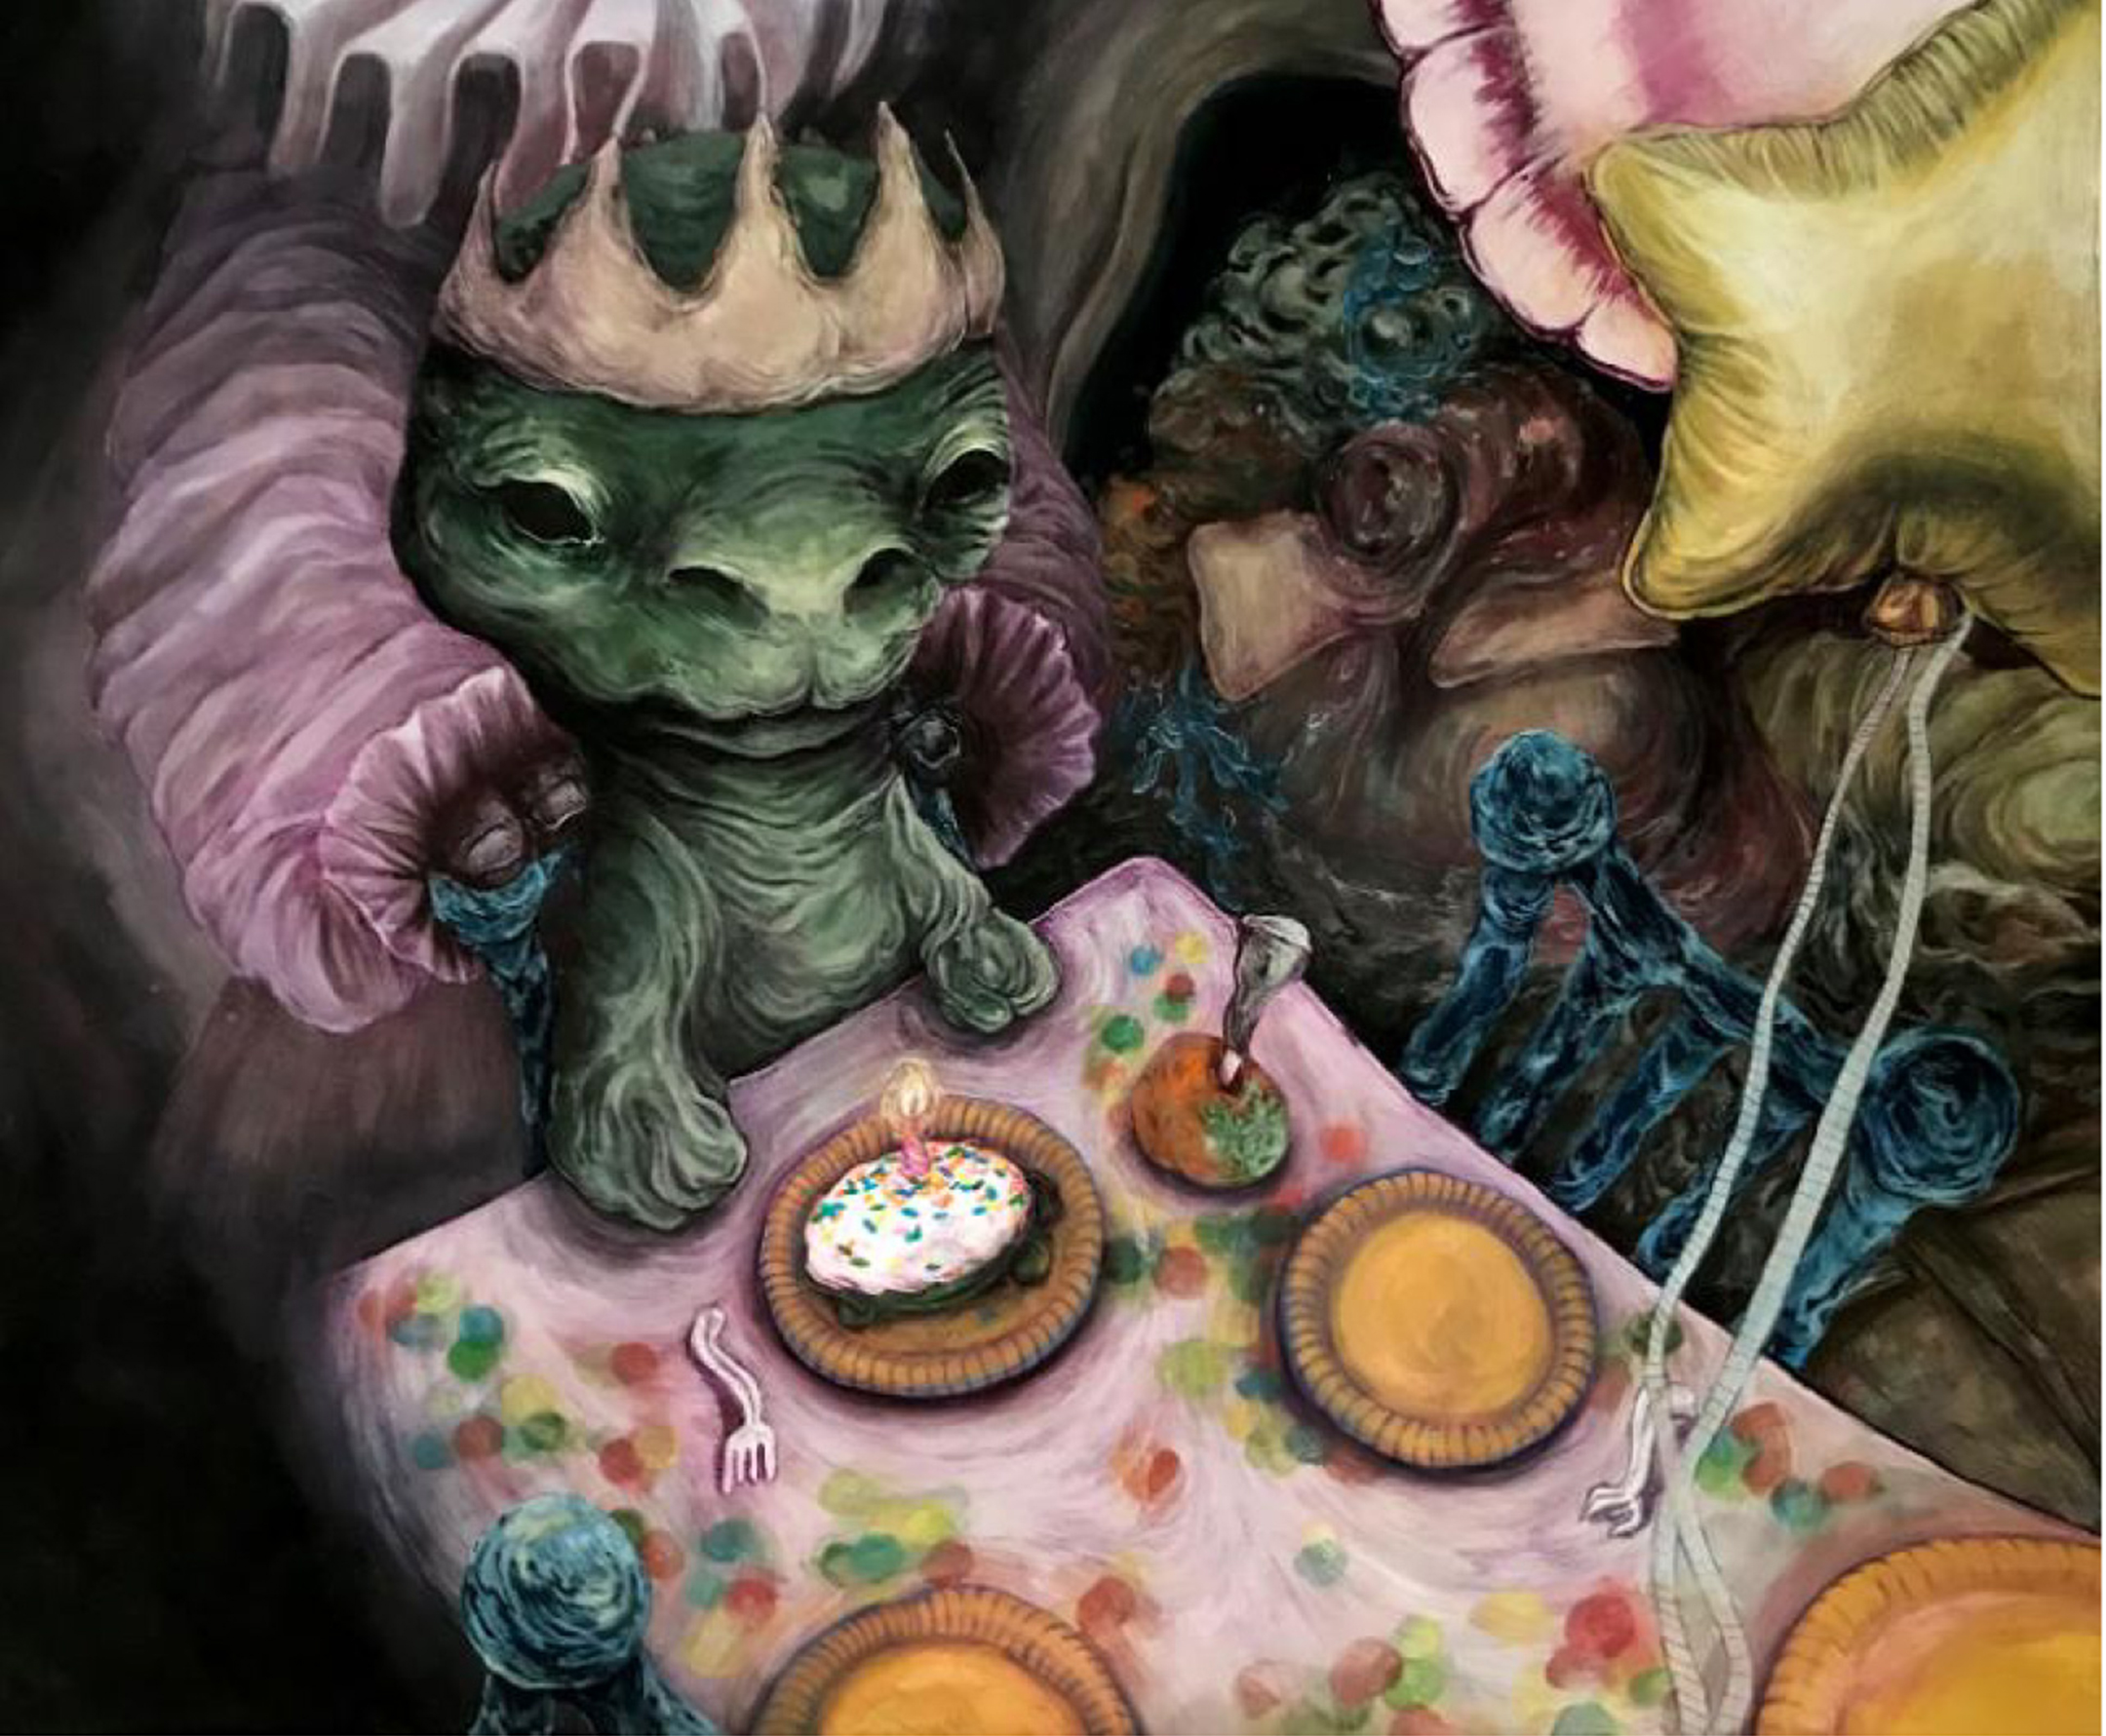 Illustration of a grotesque birthday part with a green creature in a crown looking at a cupcake with a candle burning on top of it